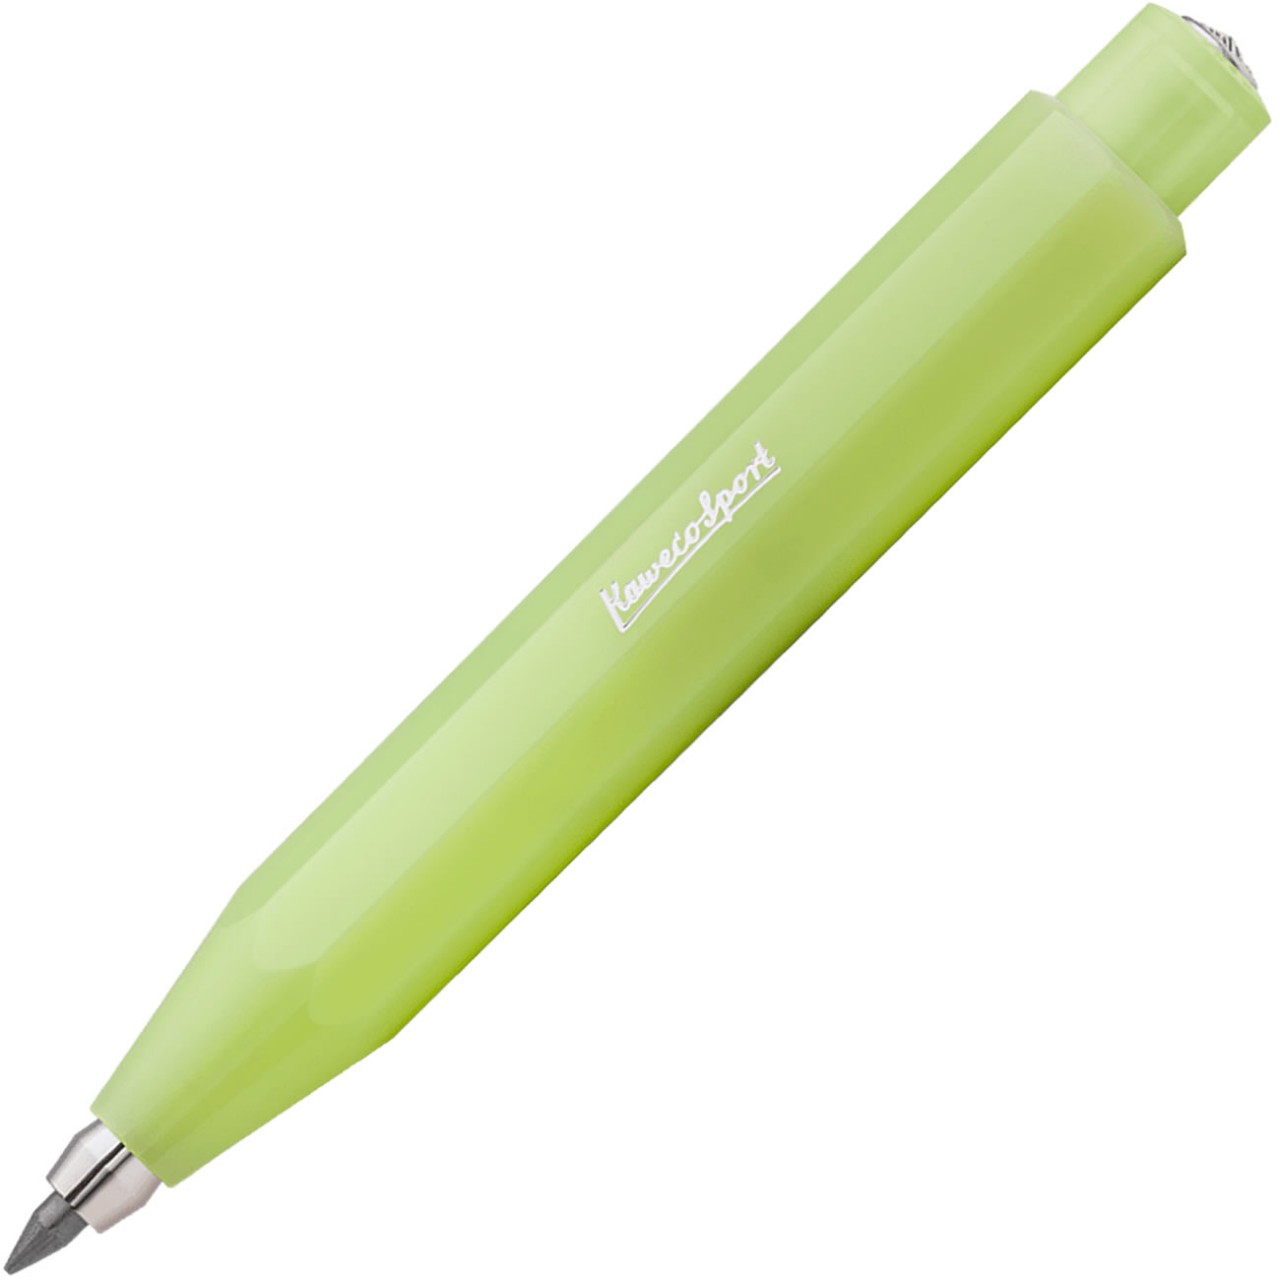 Kaweco FROSTED SPORT Fallbleistift 3.2 mm Fine Lime